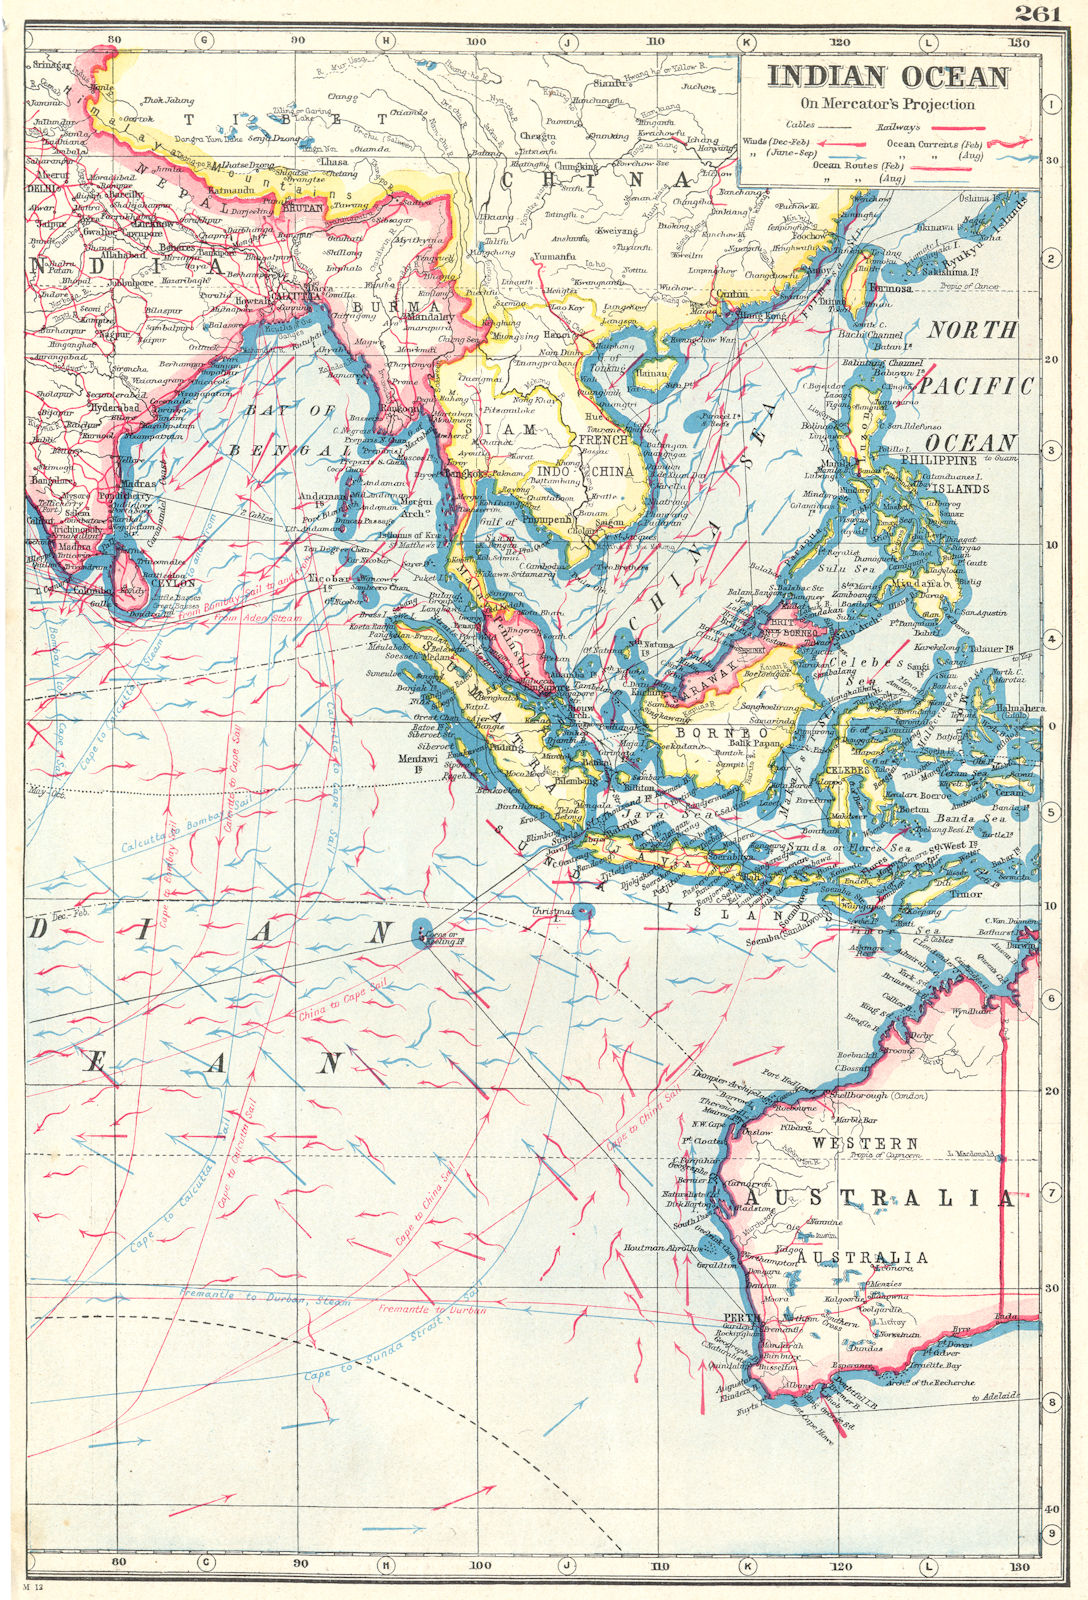 Associate Product INDIAN OCEAN EAST. East Indies. Shows winds & ocean currents 1920 old map